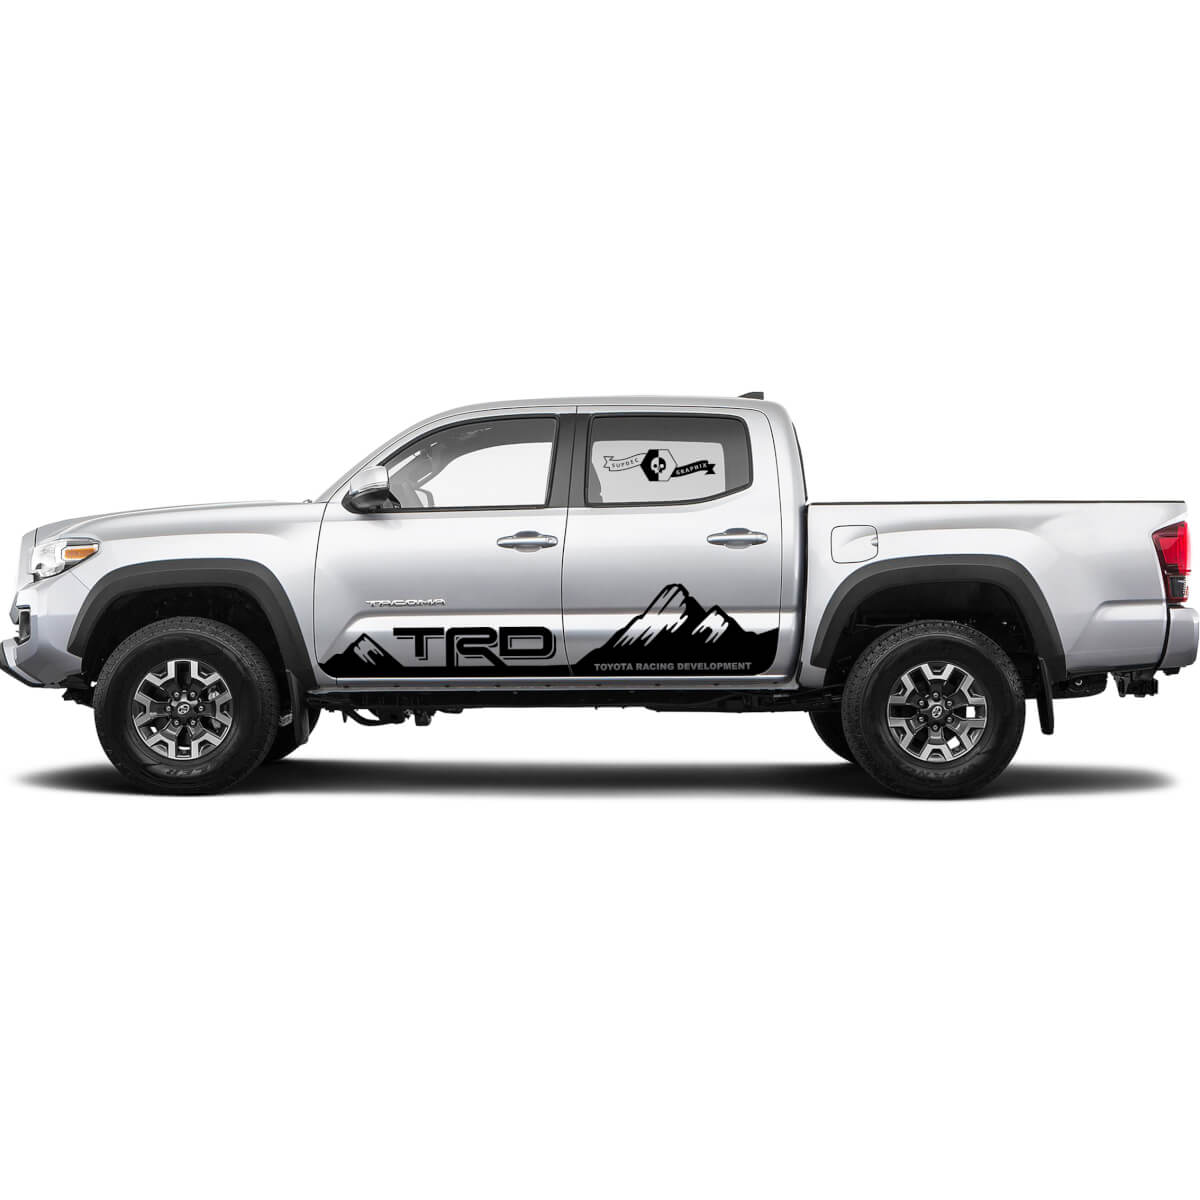 TRD off road Mountains Style for Side Rocker Panel Truck Decals Stickers for Tacoma Tundra Hilux 4Runner 12